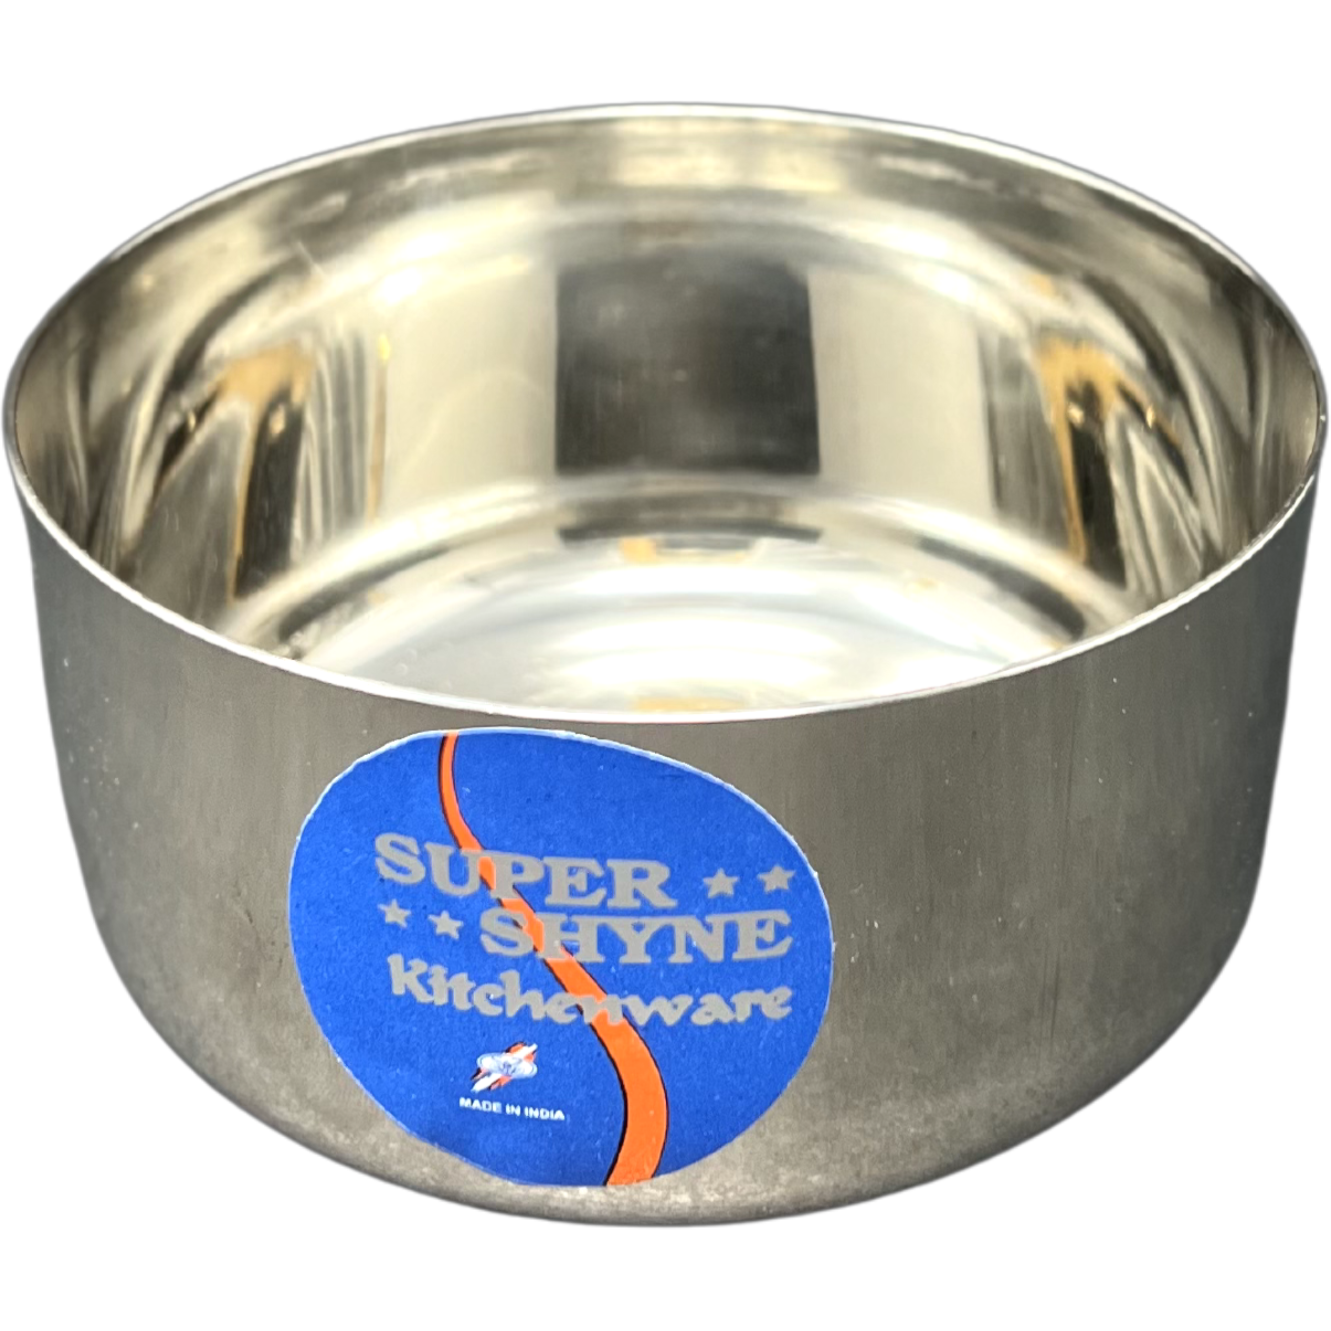 Case of 6 - Super Shyne Stainless Steel Bowl - 6 Inch